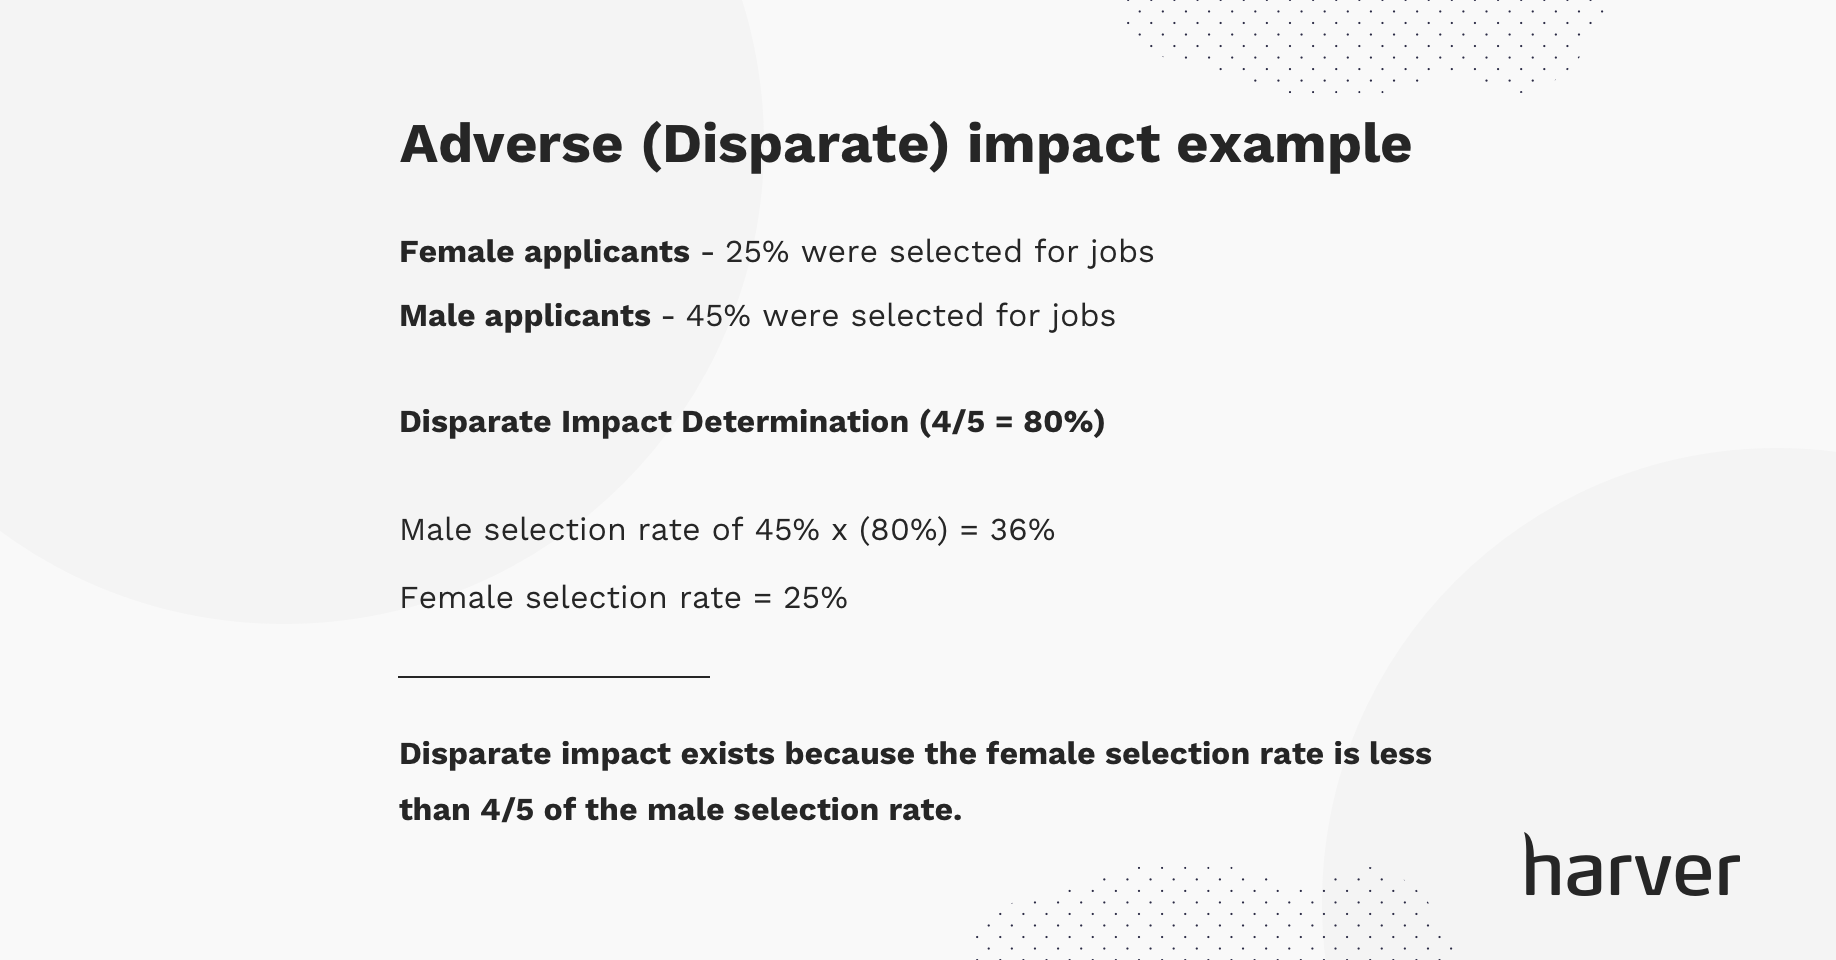 Adverse (Disparate) Impact Example